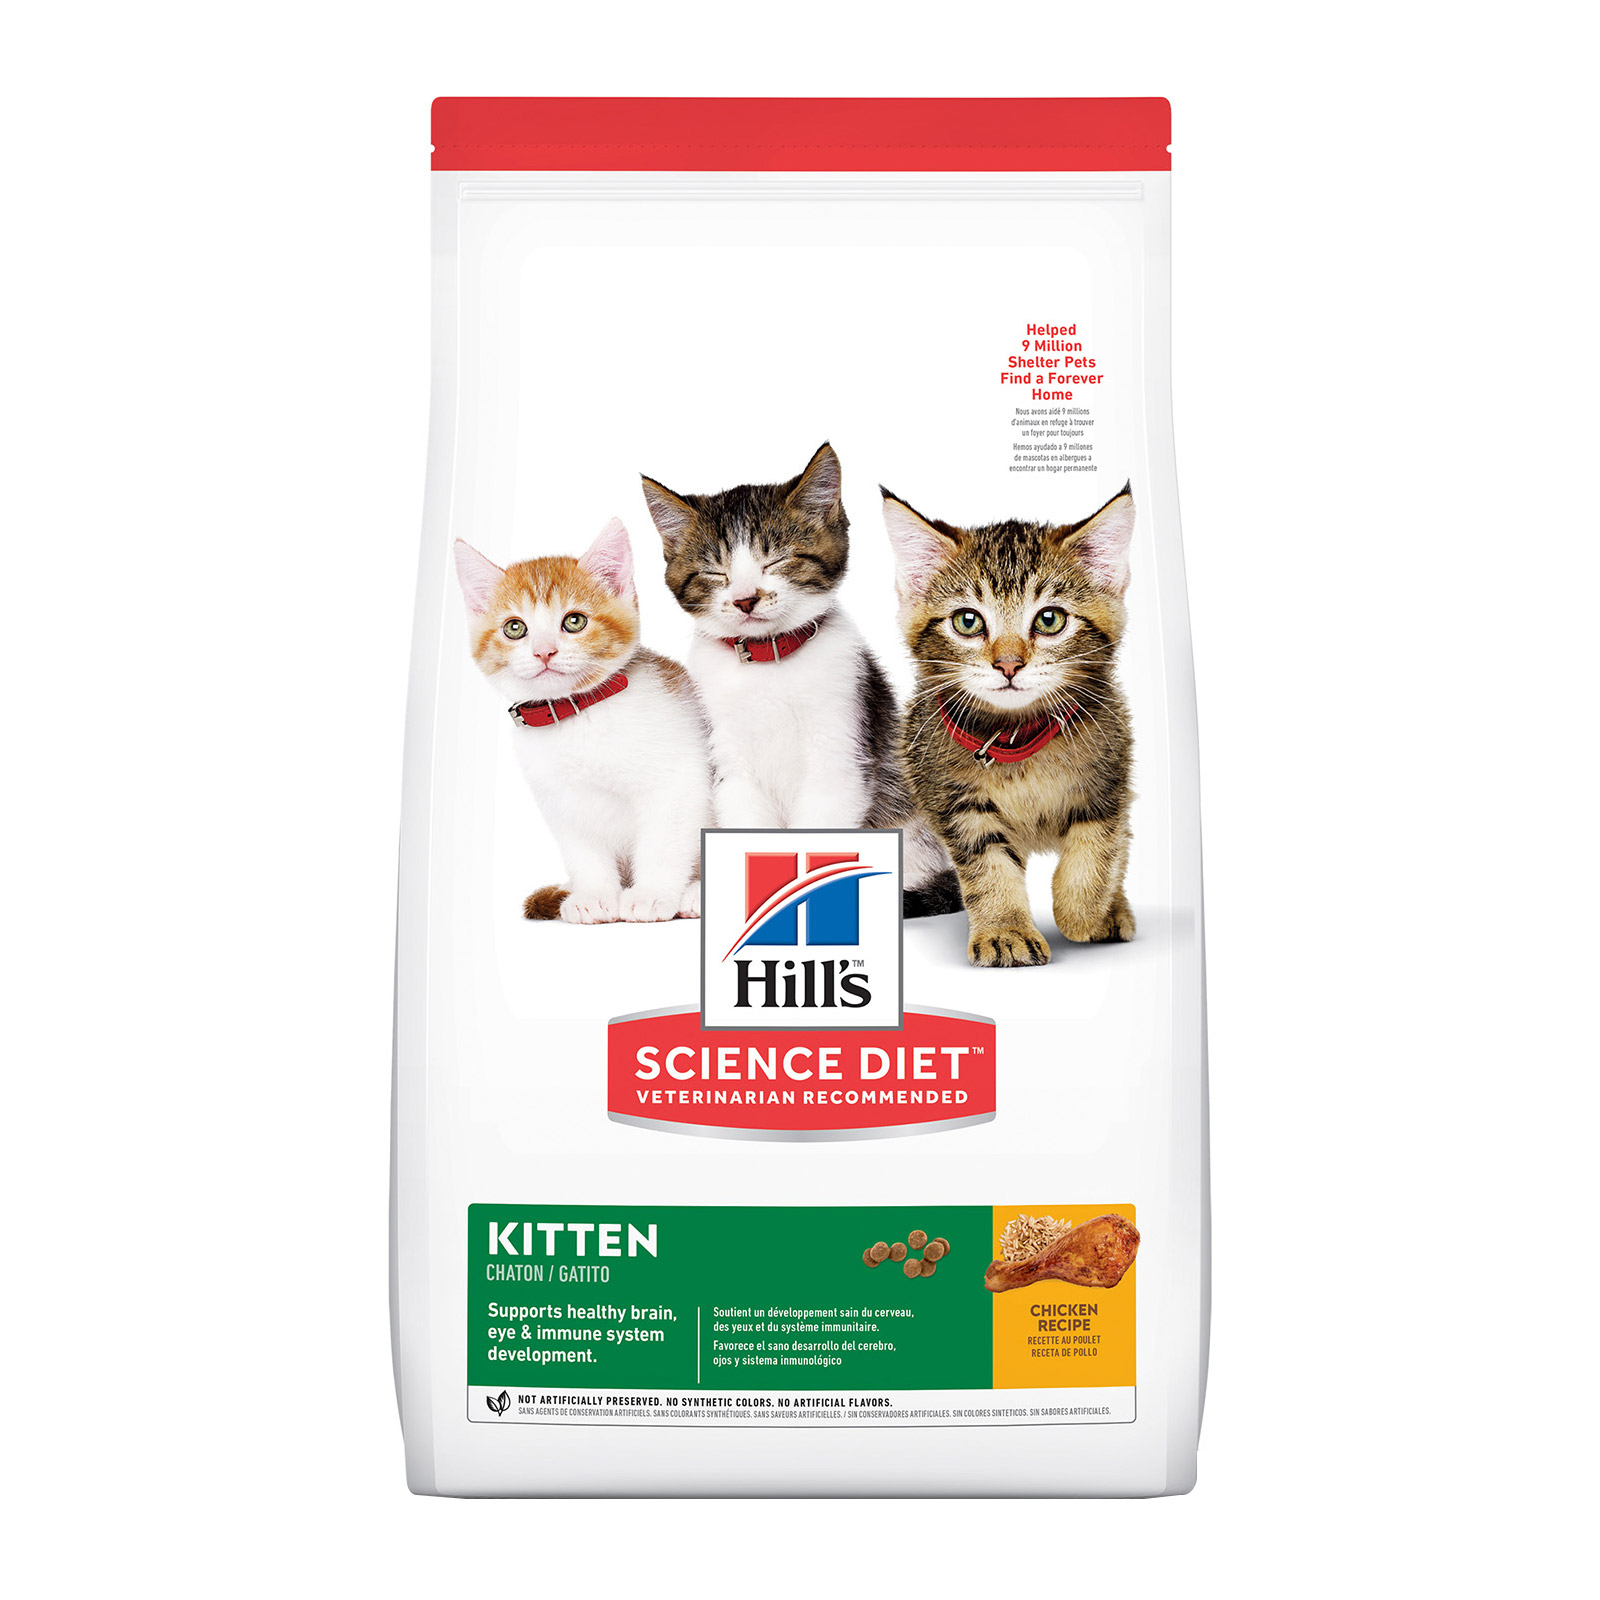 Hill's Science Diet Kitten Chicken Dry Cat Food for Food